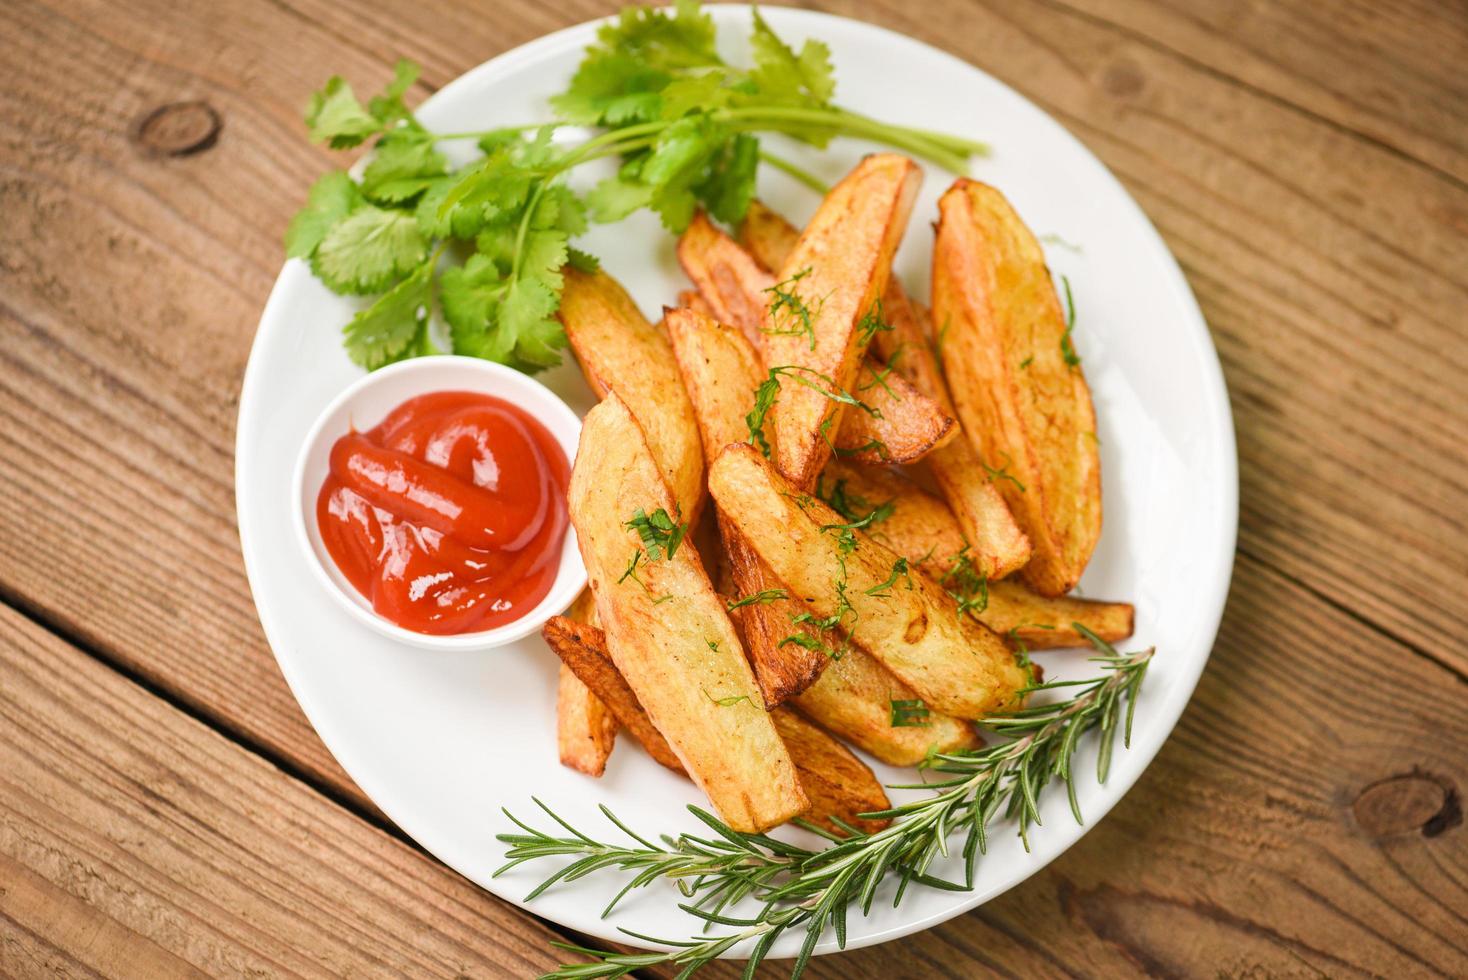 Potato wedges on white plate with rosemary herb coriander and tomato ketchup sauce, Cooking french fries or fry potatoes photo